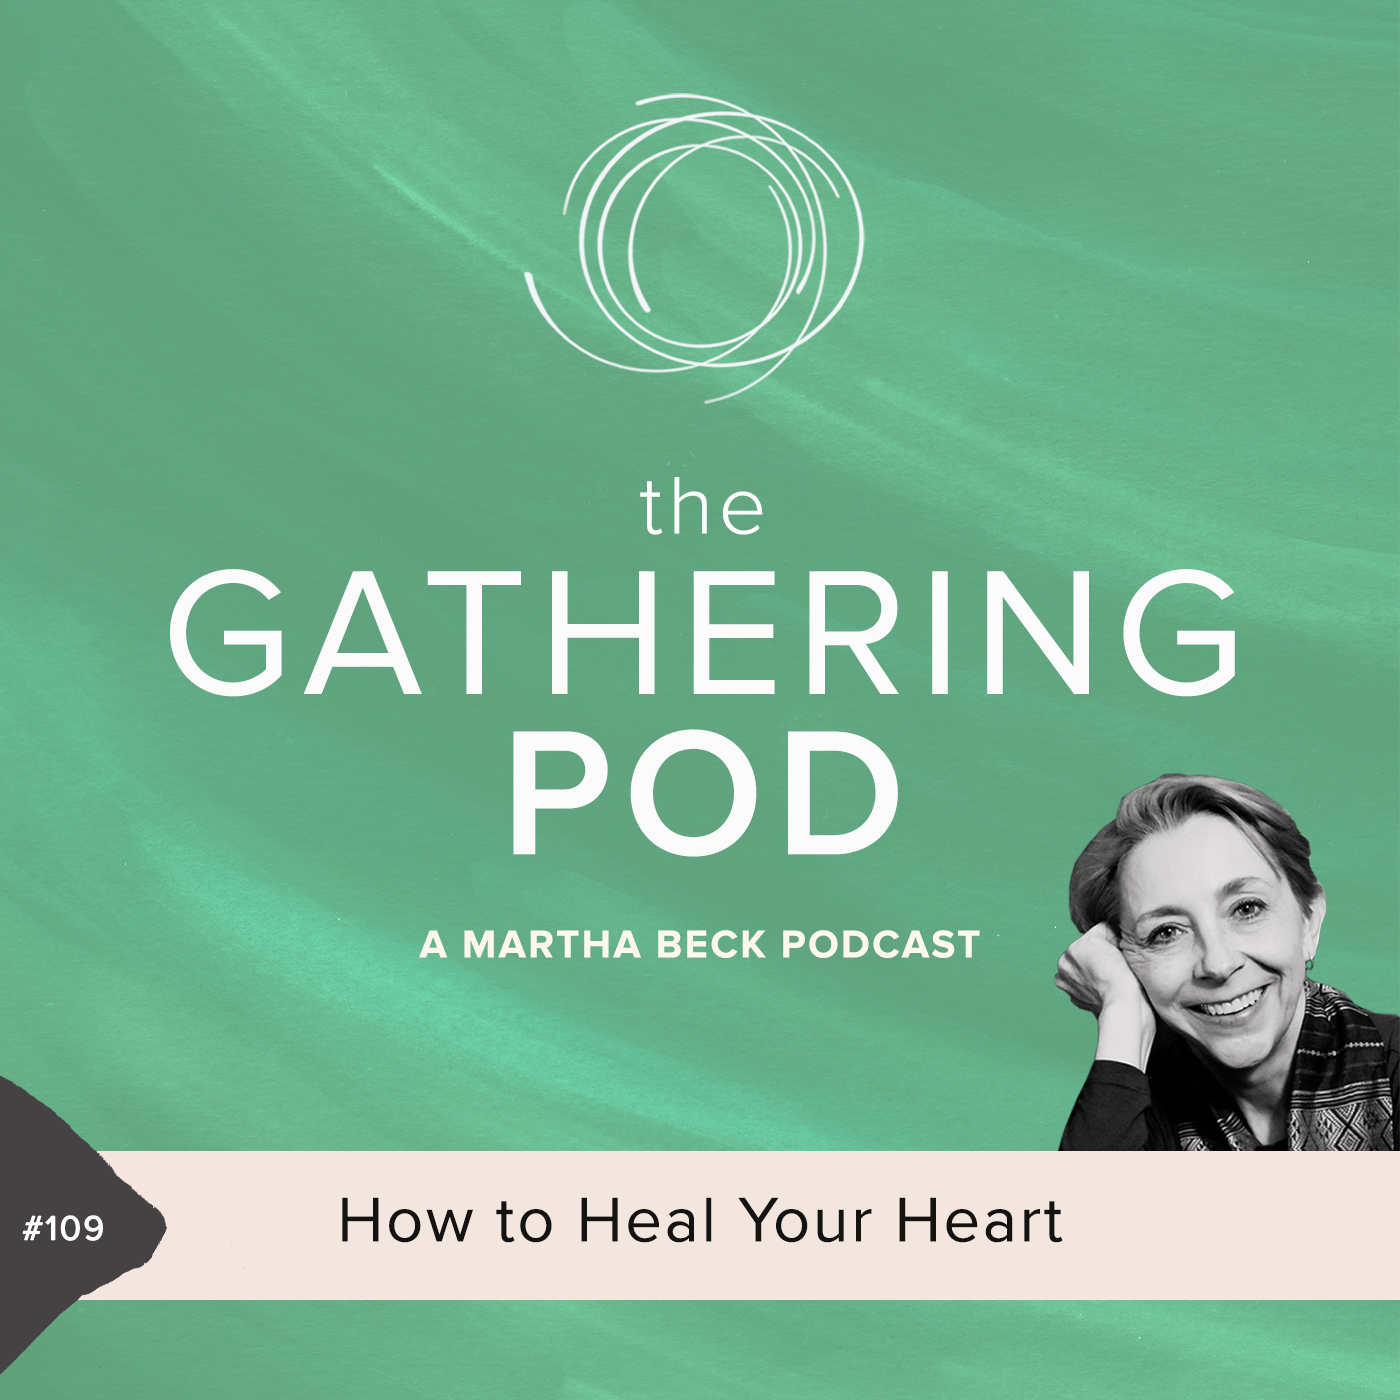 Image for The Gathering Pod A Martha Beck Podcast Episode #109 How to Heal Your Heart